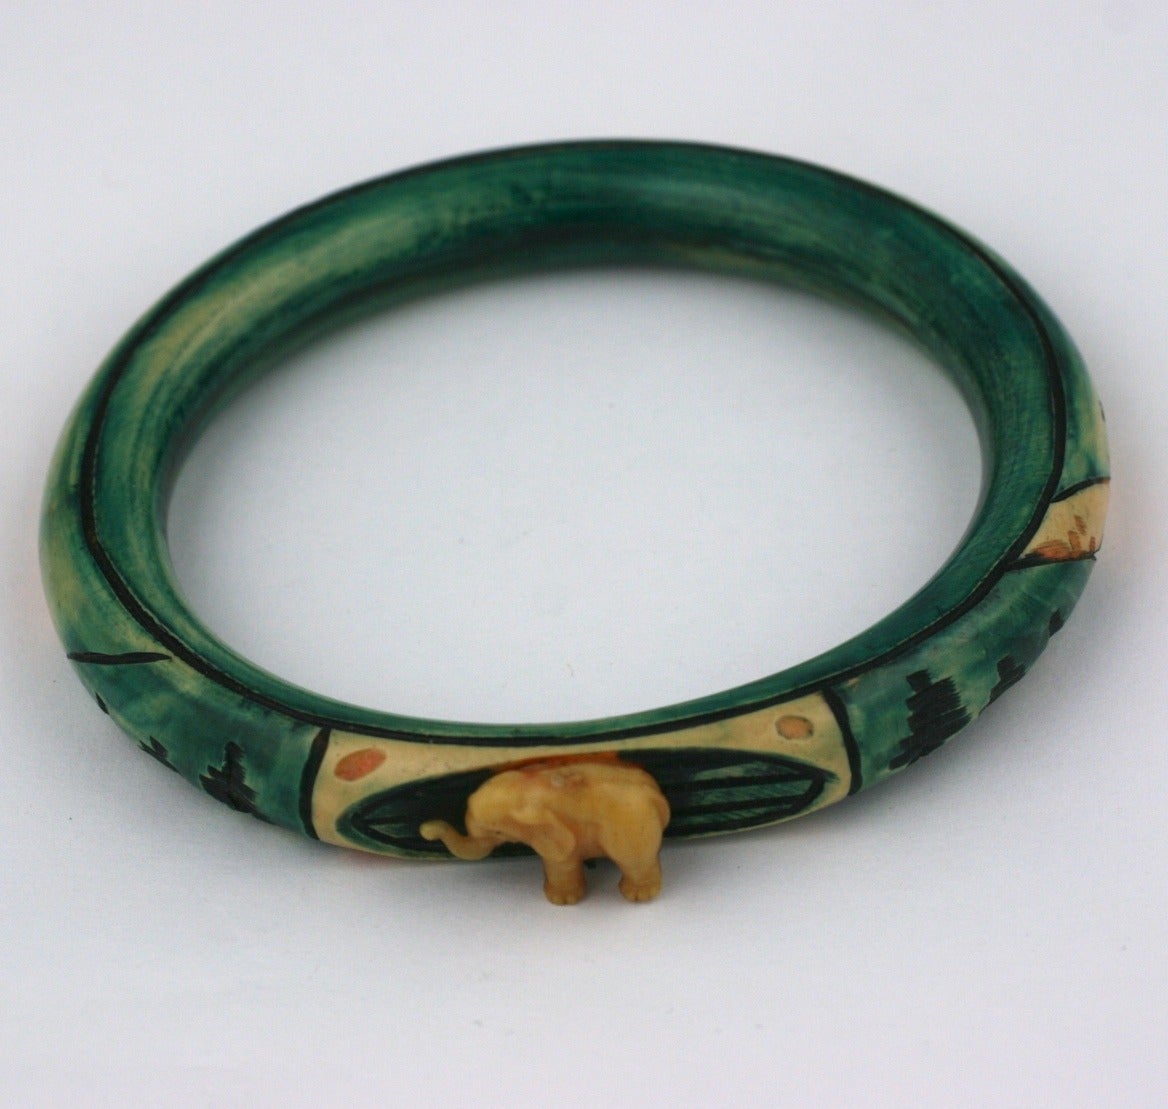 French Art Deco Anglo Indian celluloid carved, painted ,and stained bangle bracelet. The top motif centers a three dimensional lucky (trunk up) elephant.The body of the bracelet is carved with various flora and landscape in deep emerald, cream and